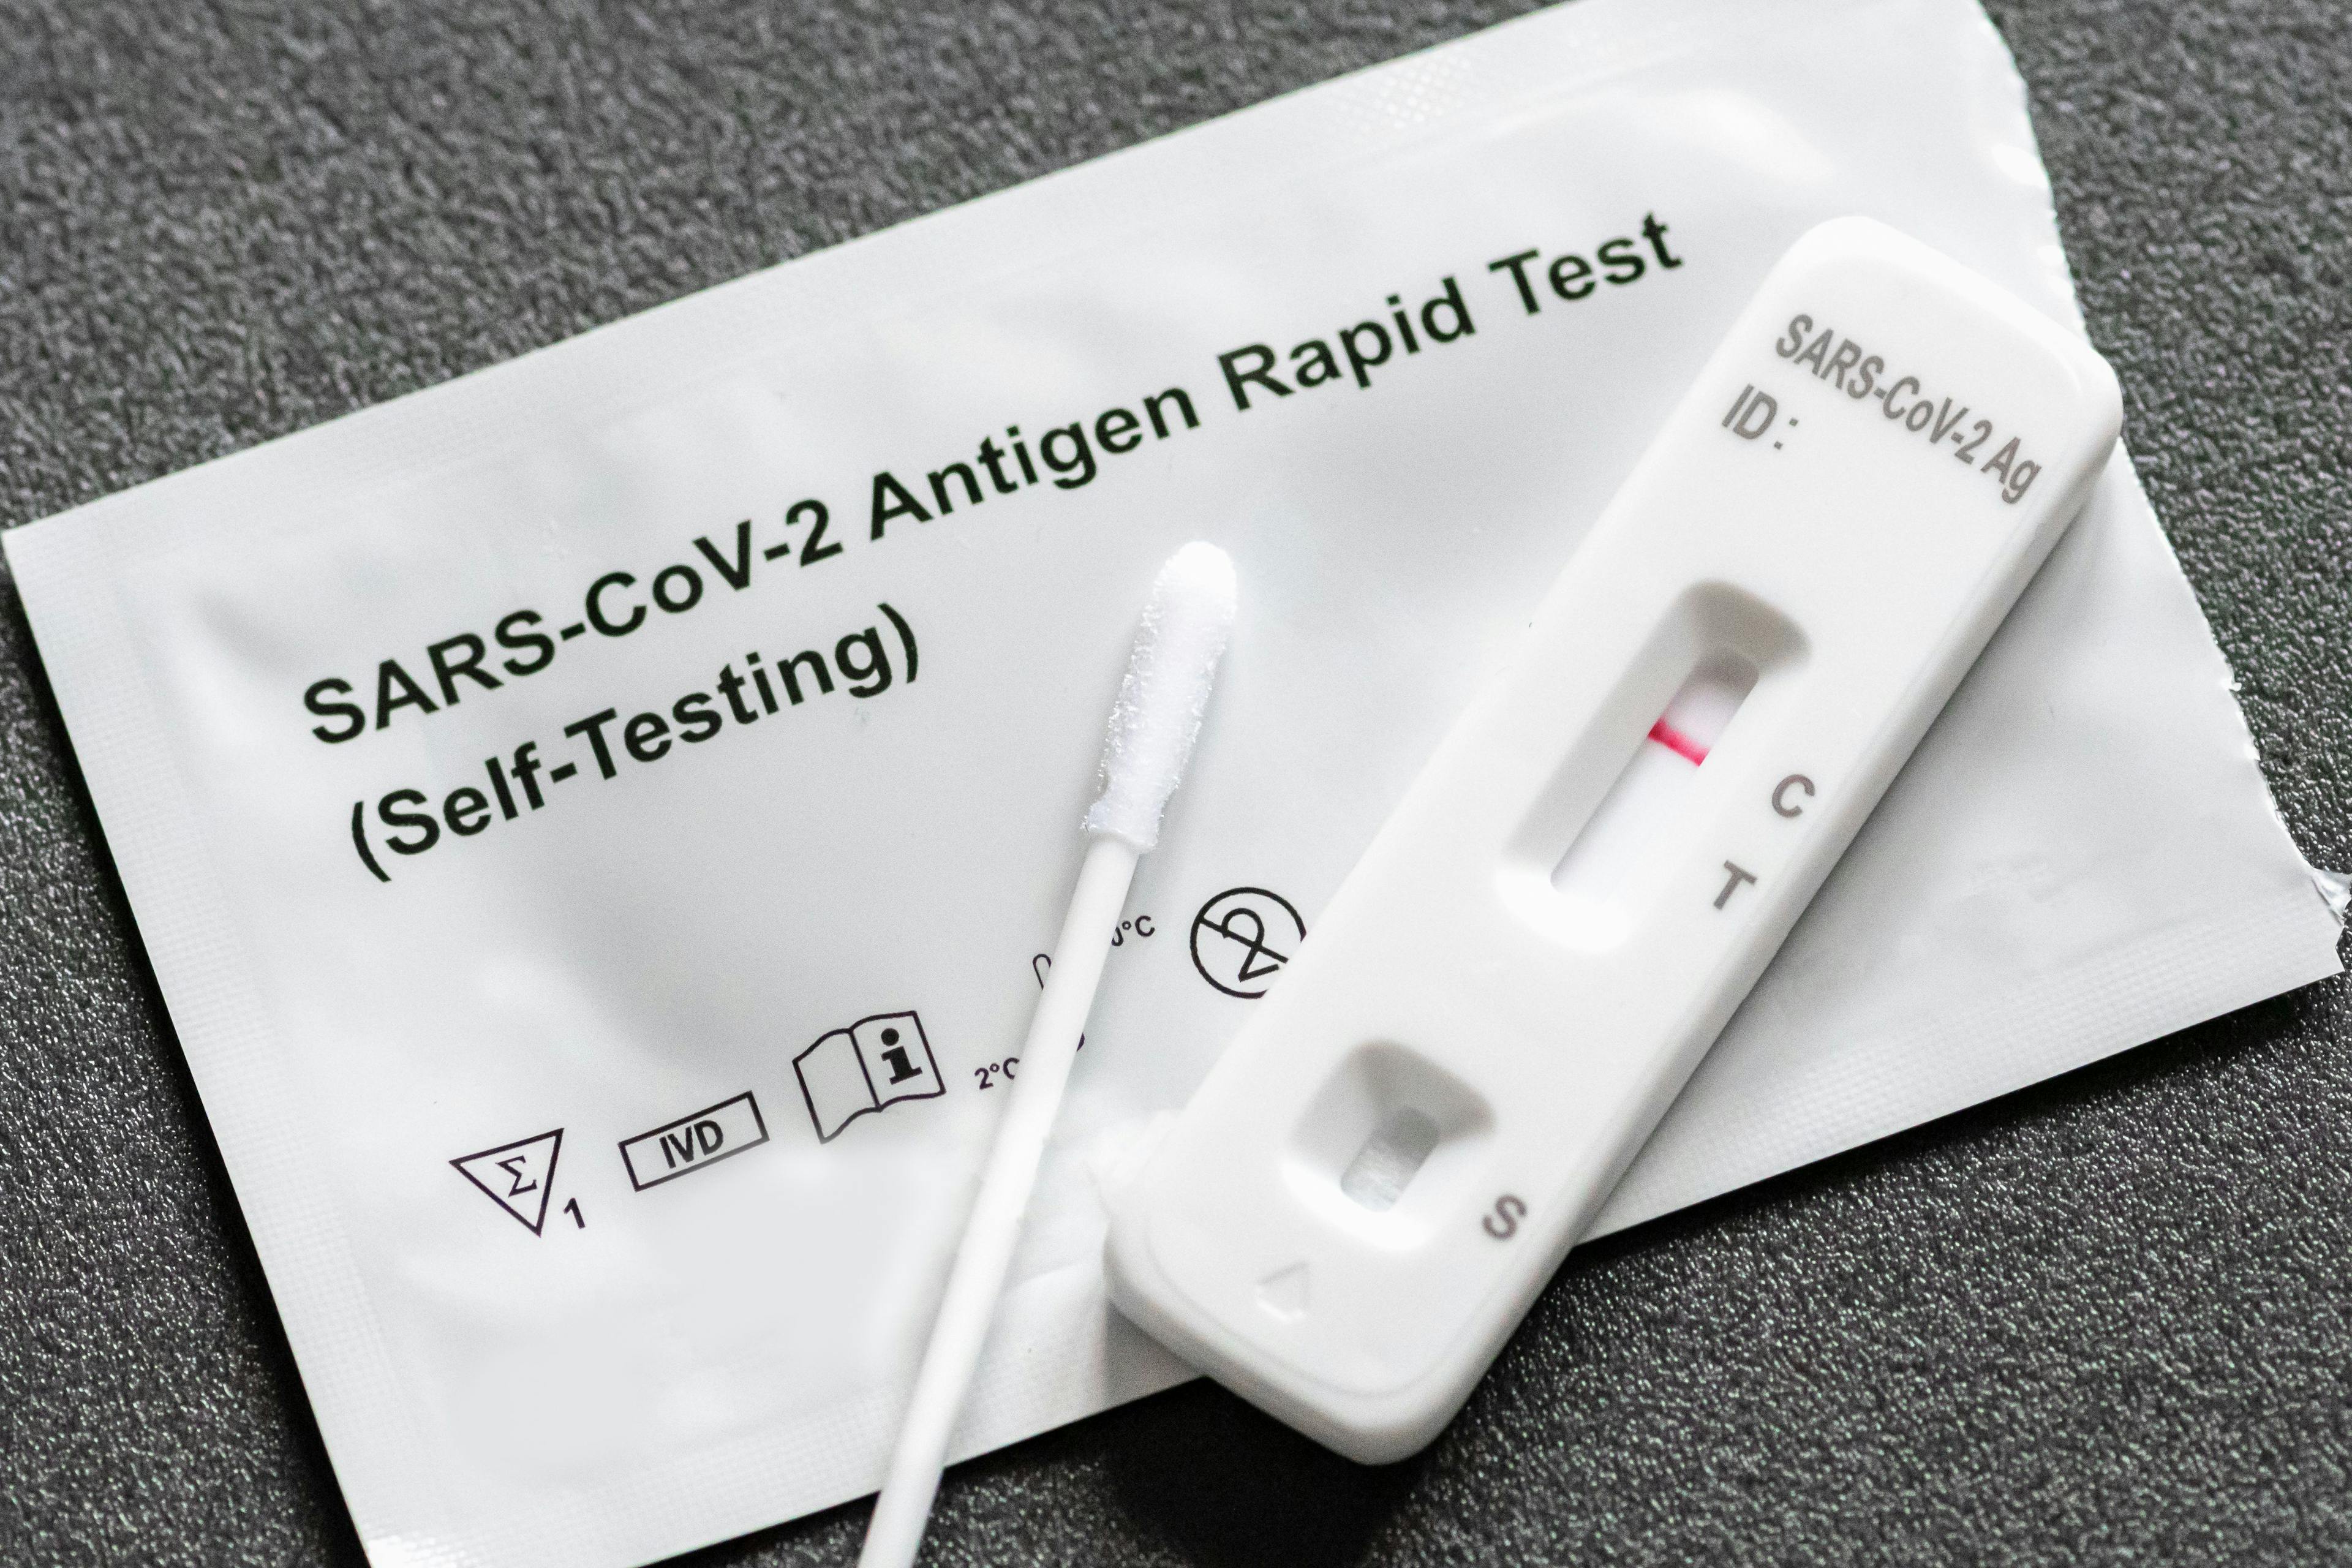 Study finds high false positive results with one batch of a rapid antigen test for SARS-CoV-2 but "very low" overall false positive rate.